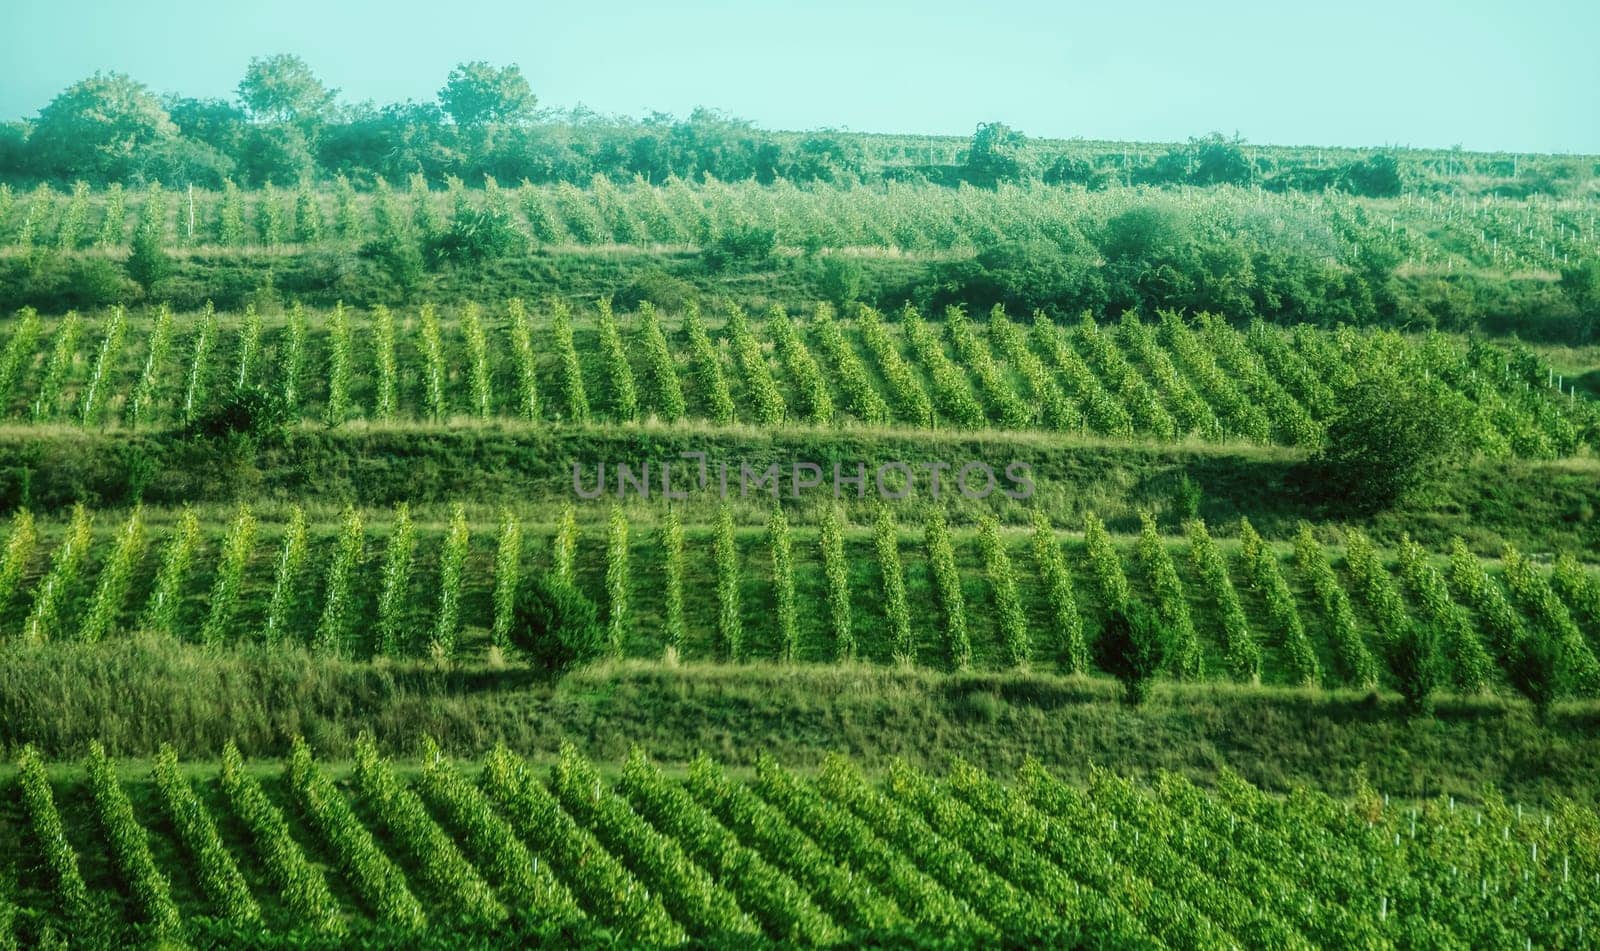 Beautiful view of stripe planted green grapes